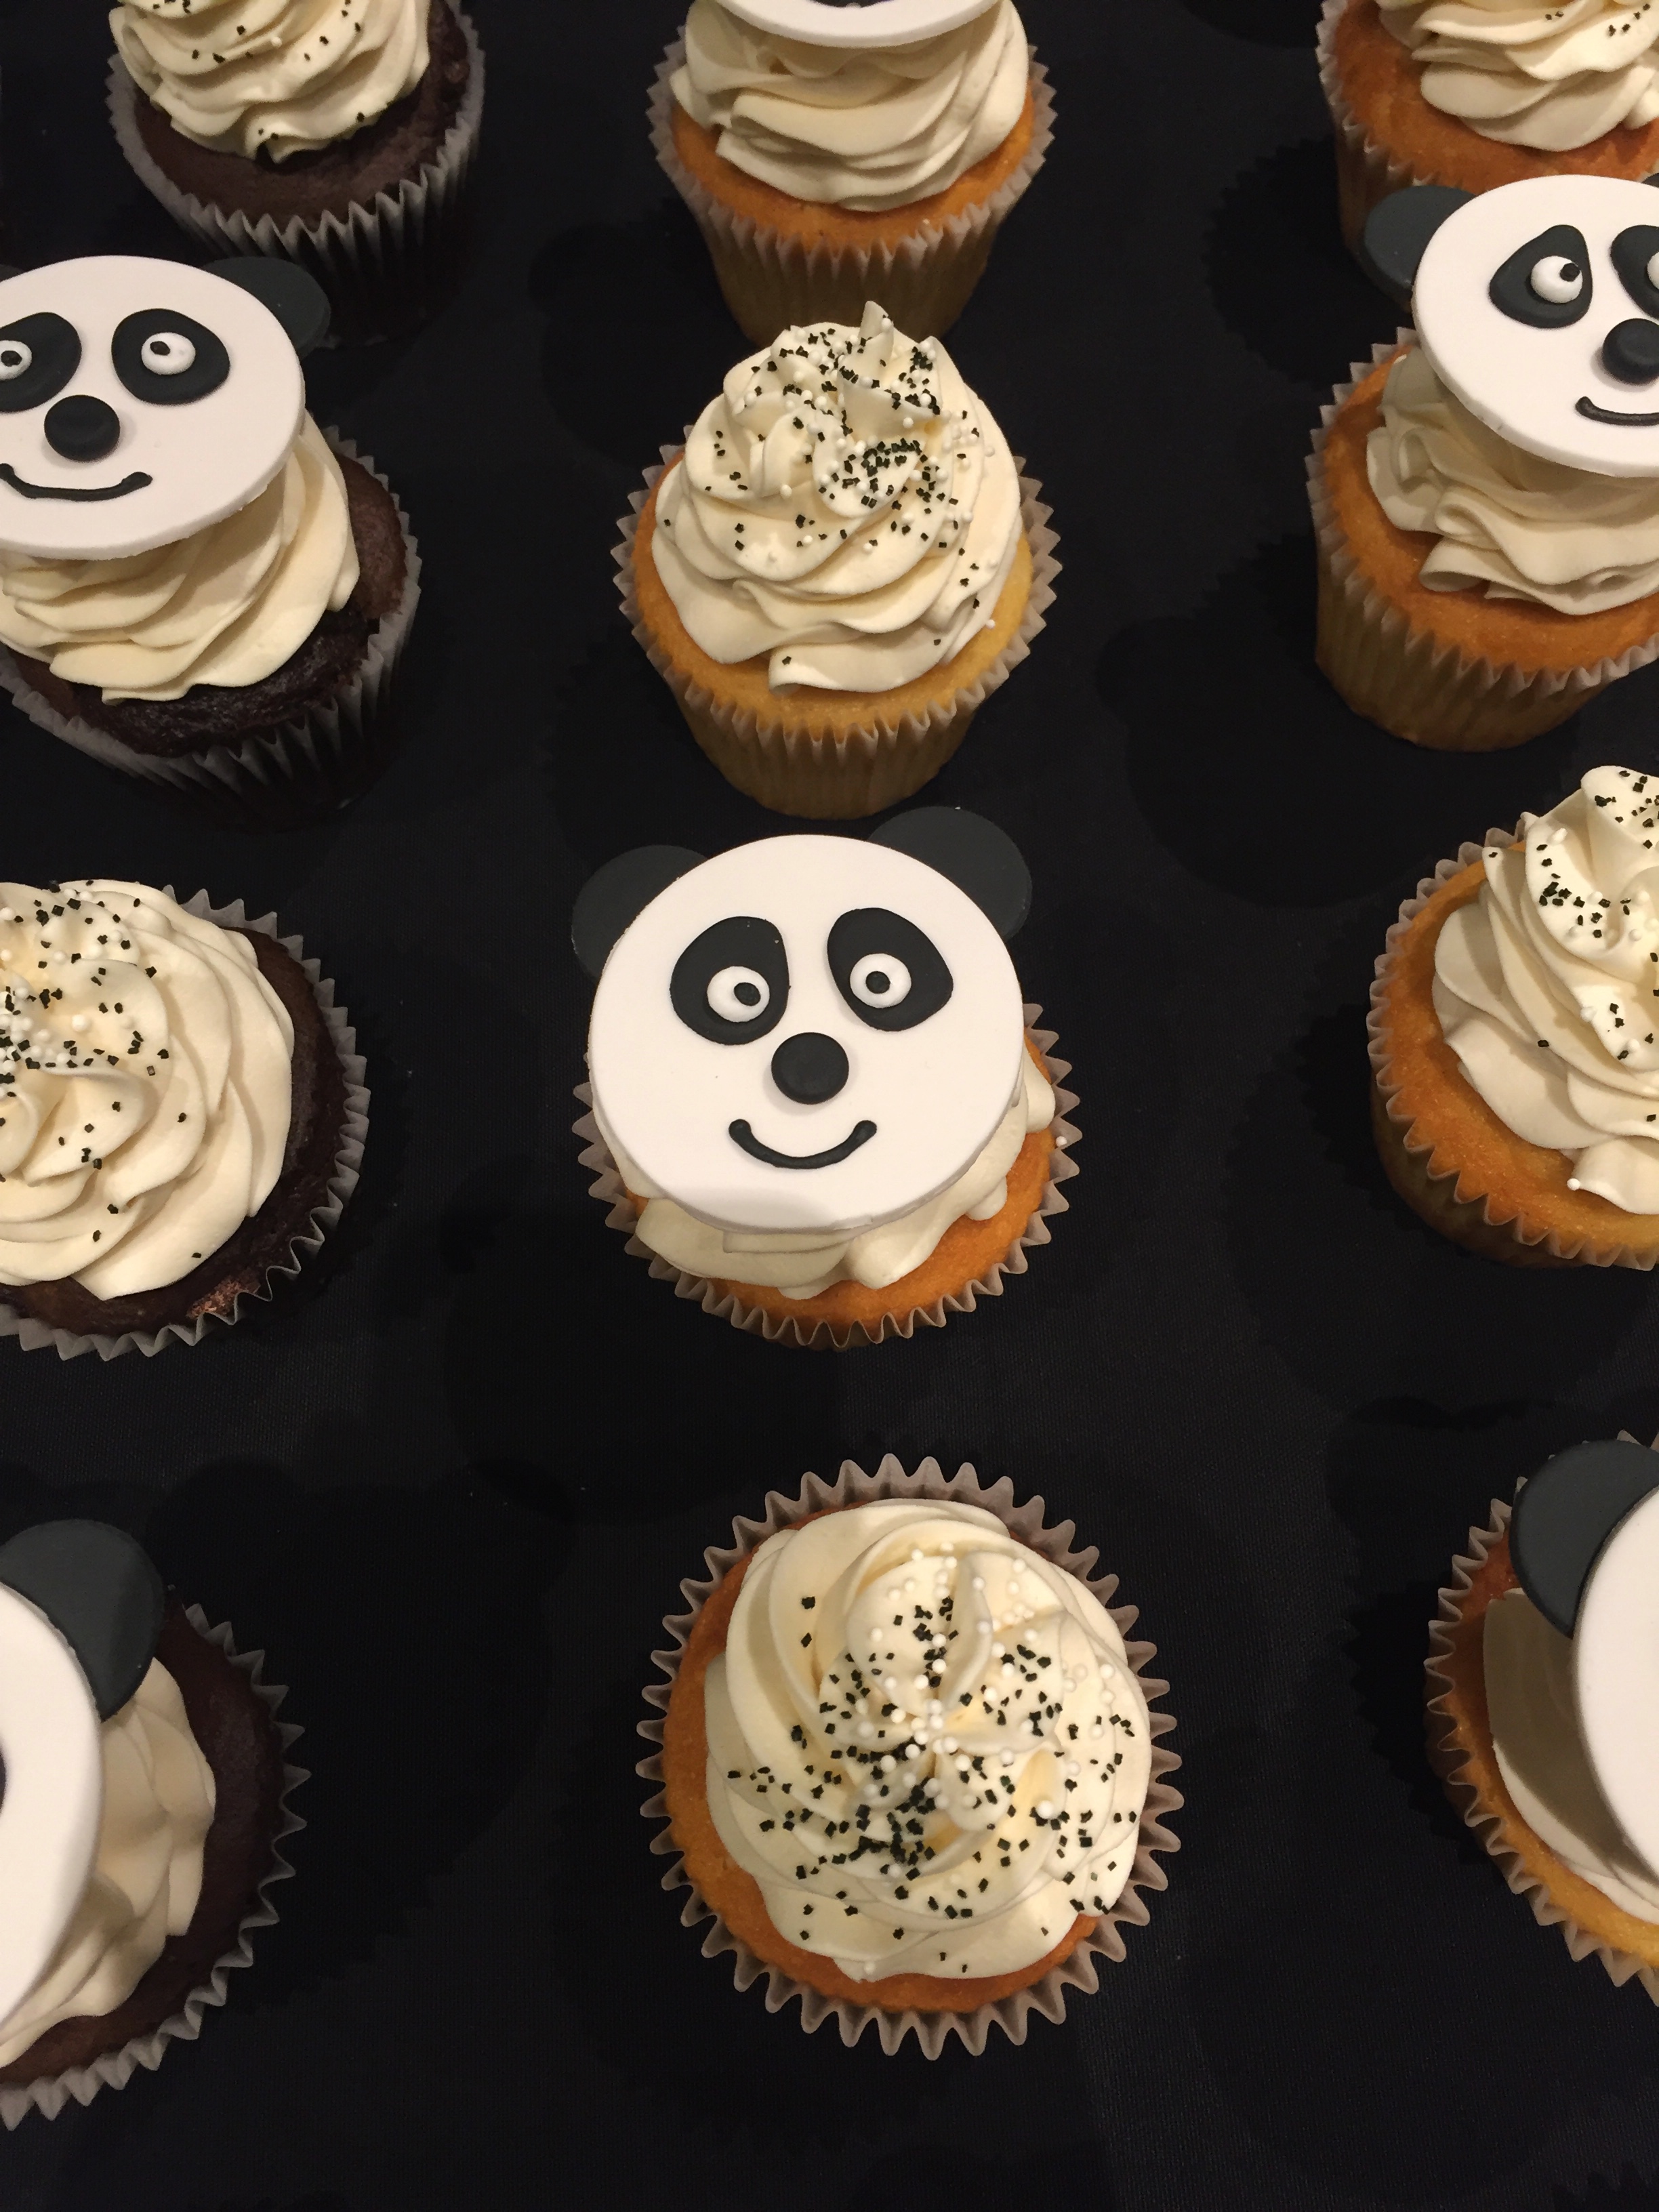 Adorable 3 Tier Panda Cake Stand And Panda Cupcakes Holder For Happy  Birthday Party Decorations From Kuguacaig, $20.05 | DHgate.Com